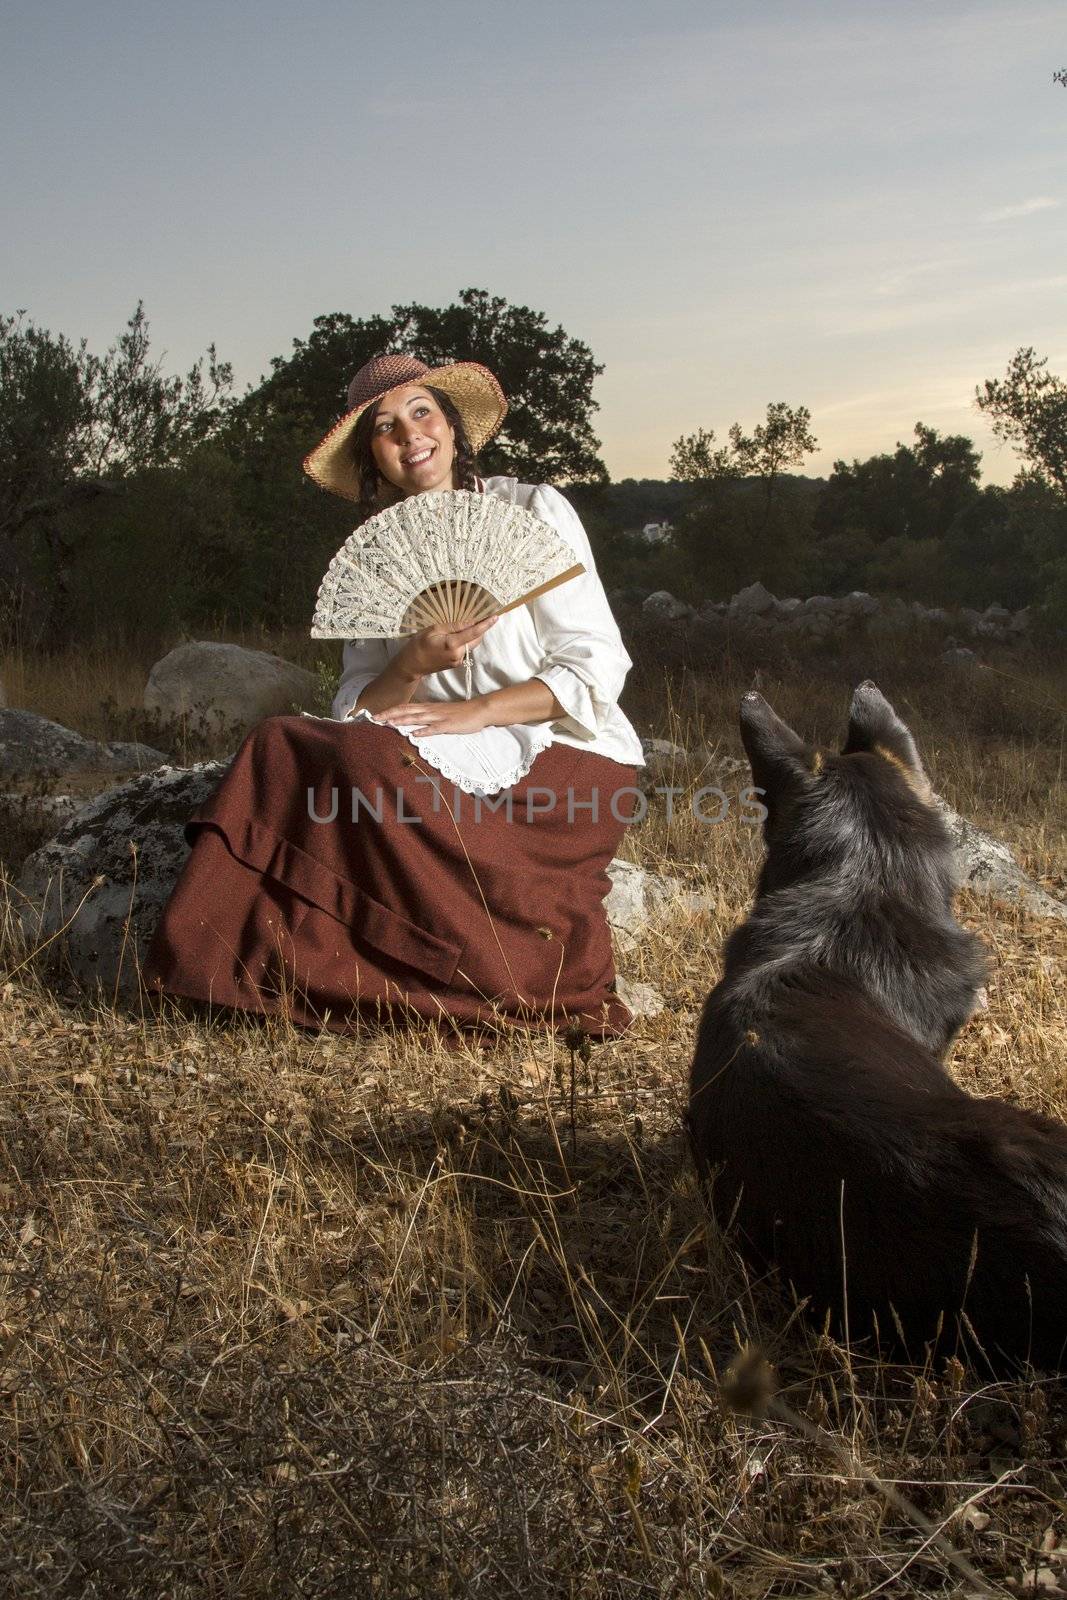 View of a beautiful girl in a classic dress in a countryside set with a dog.